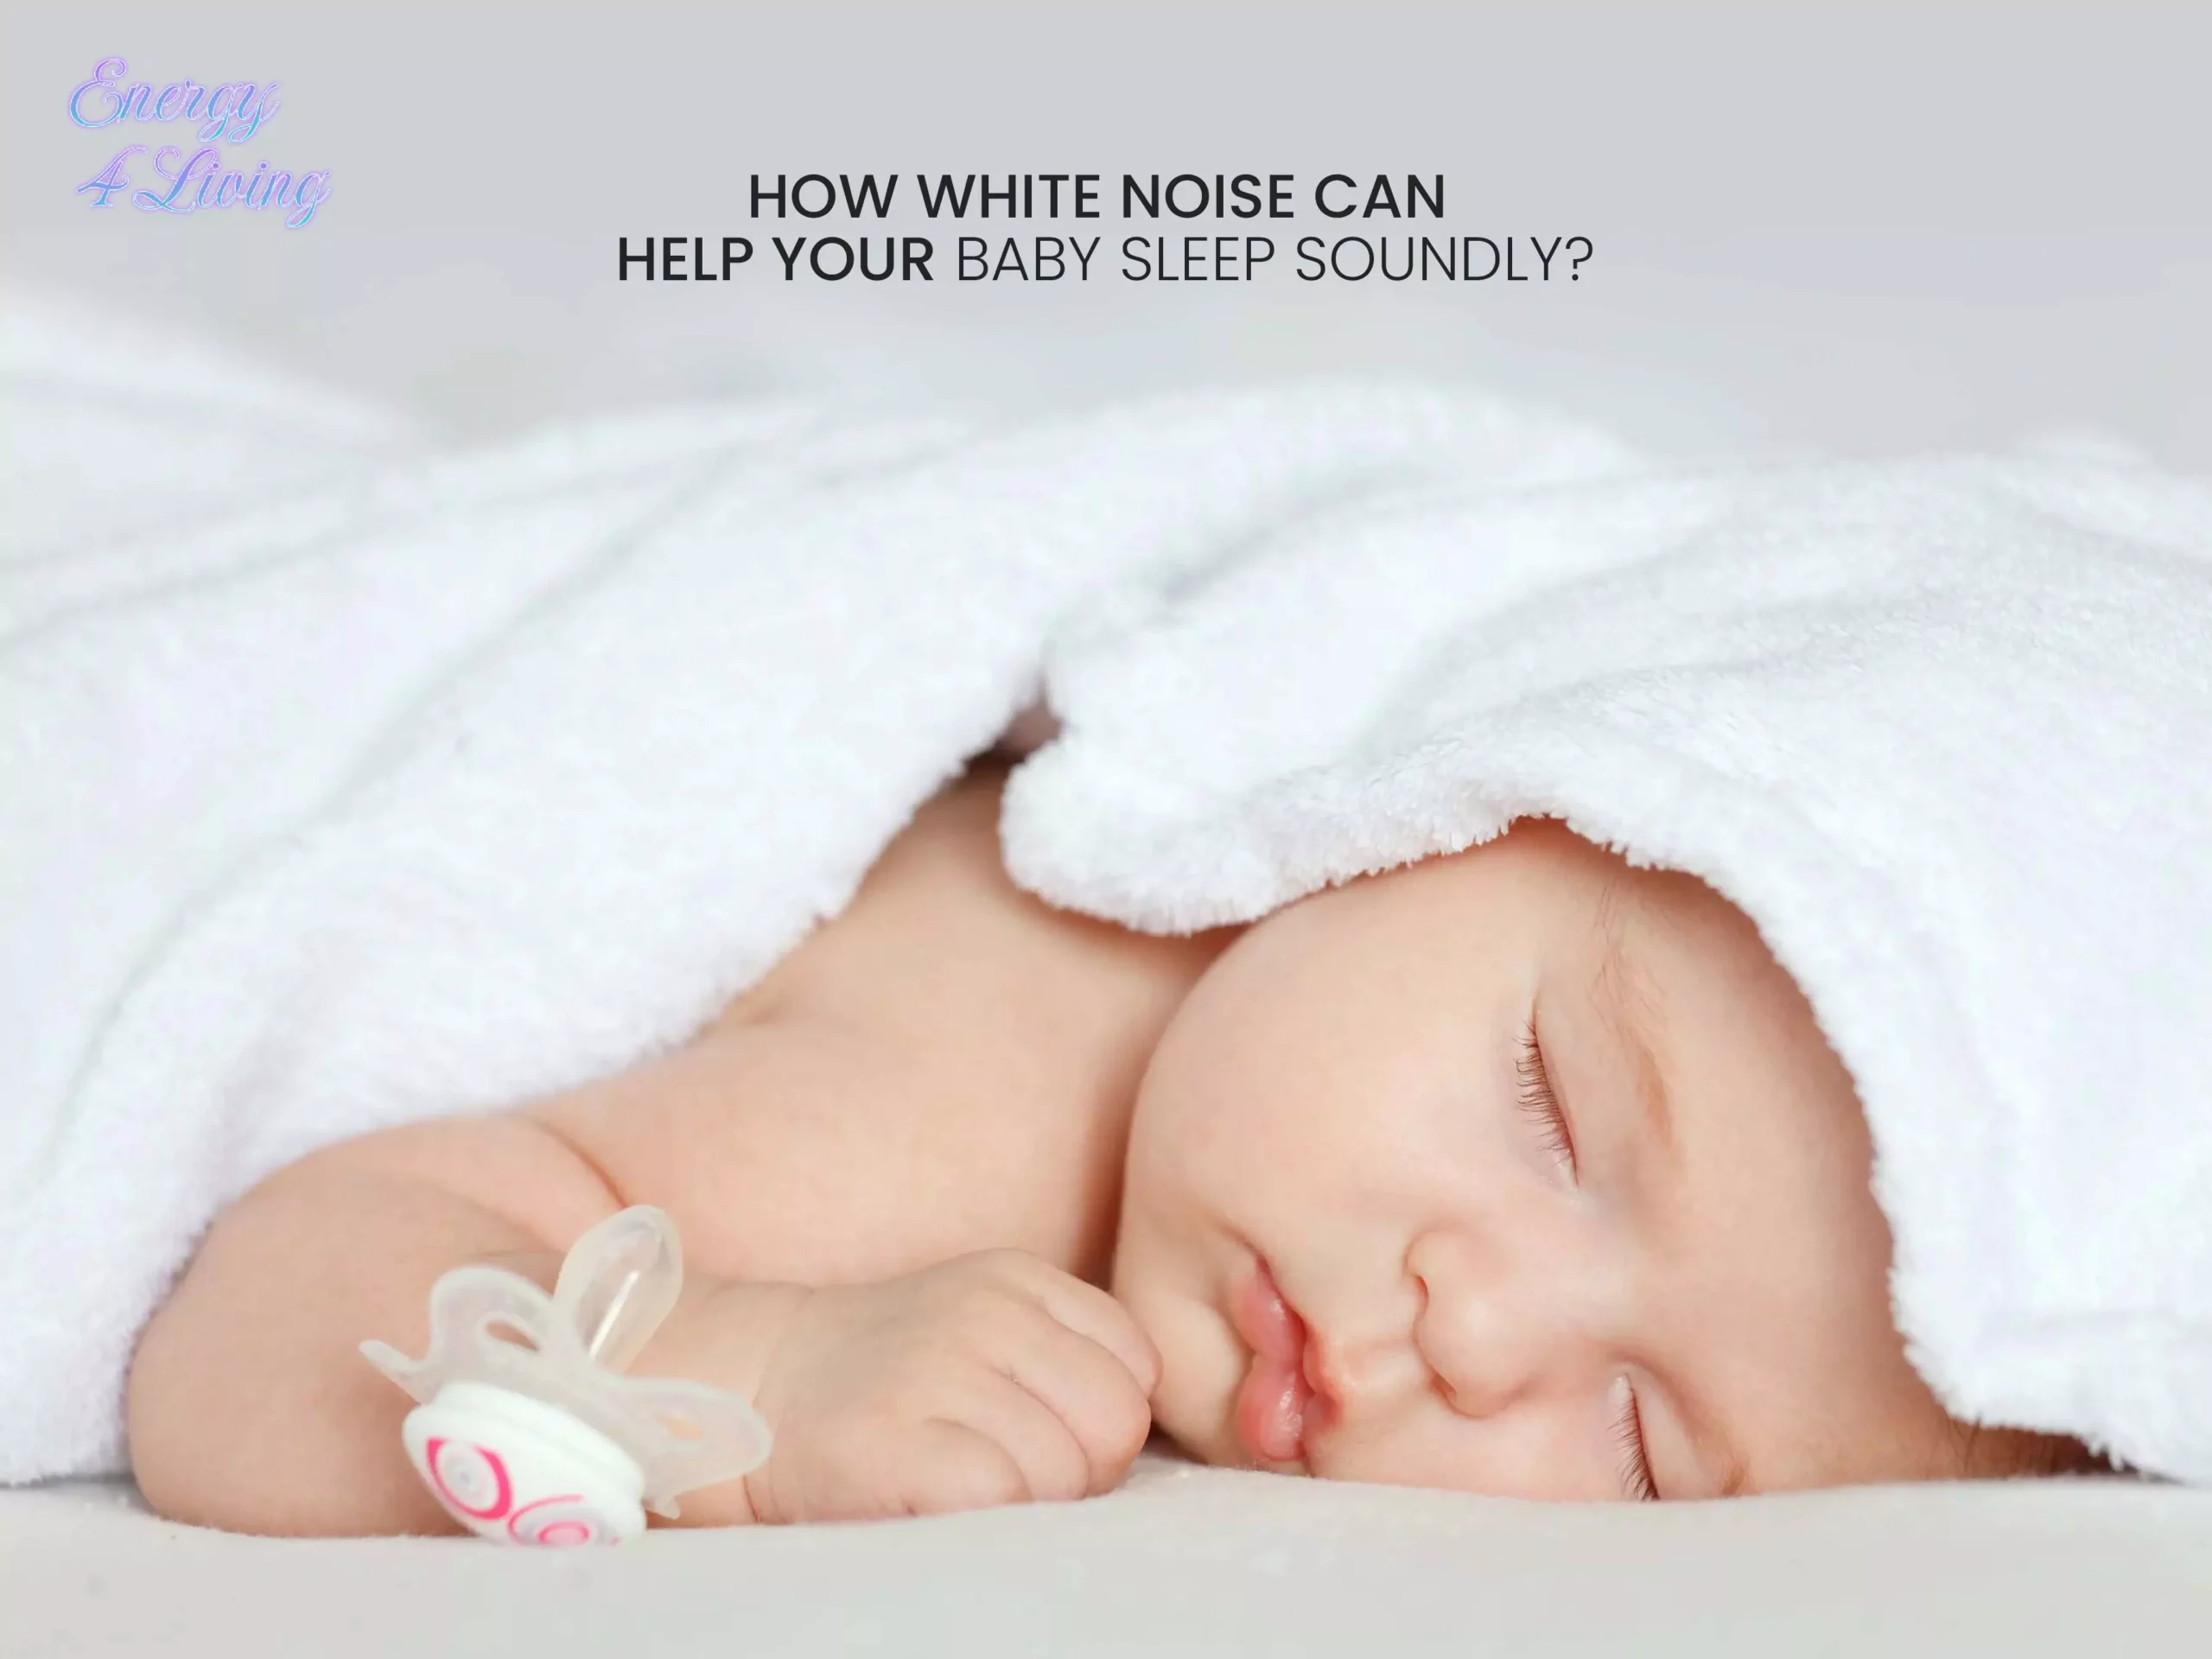 How White Noise Can Help Your Baby Sleep Soundly?